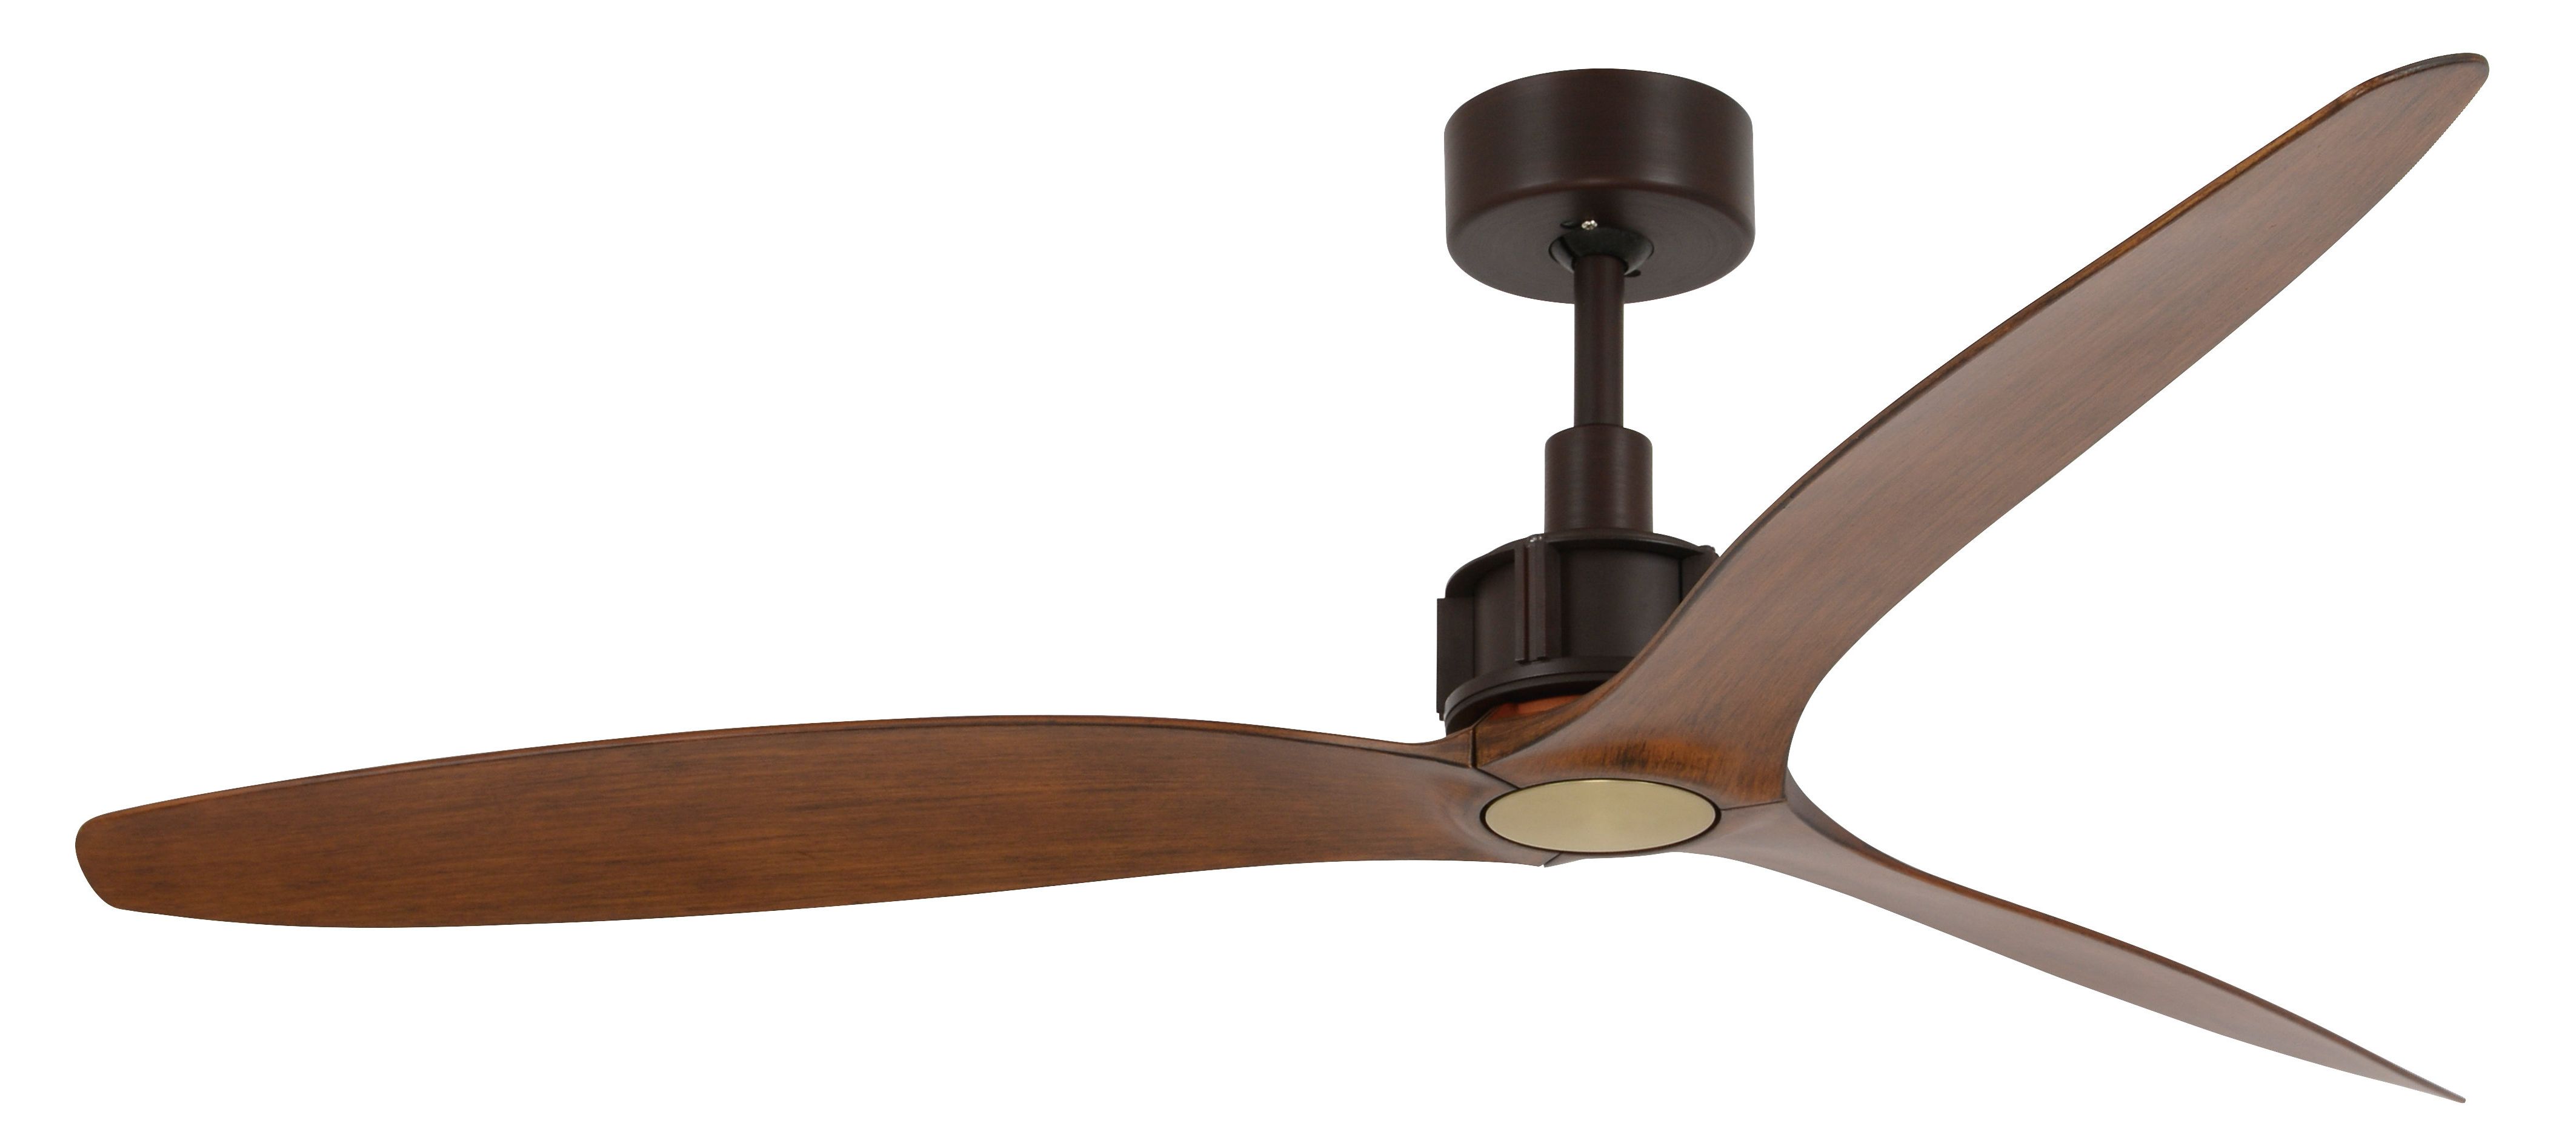 60 Aviation 3 Blade Ceiling Fans In Trendy Modern Rustic Interiors Theron 52" Catoe 3 Blade Ceiling Fan With Remote (View 19 of 20)